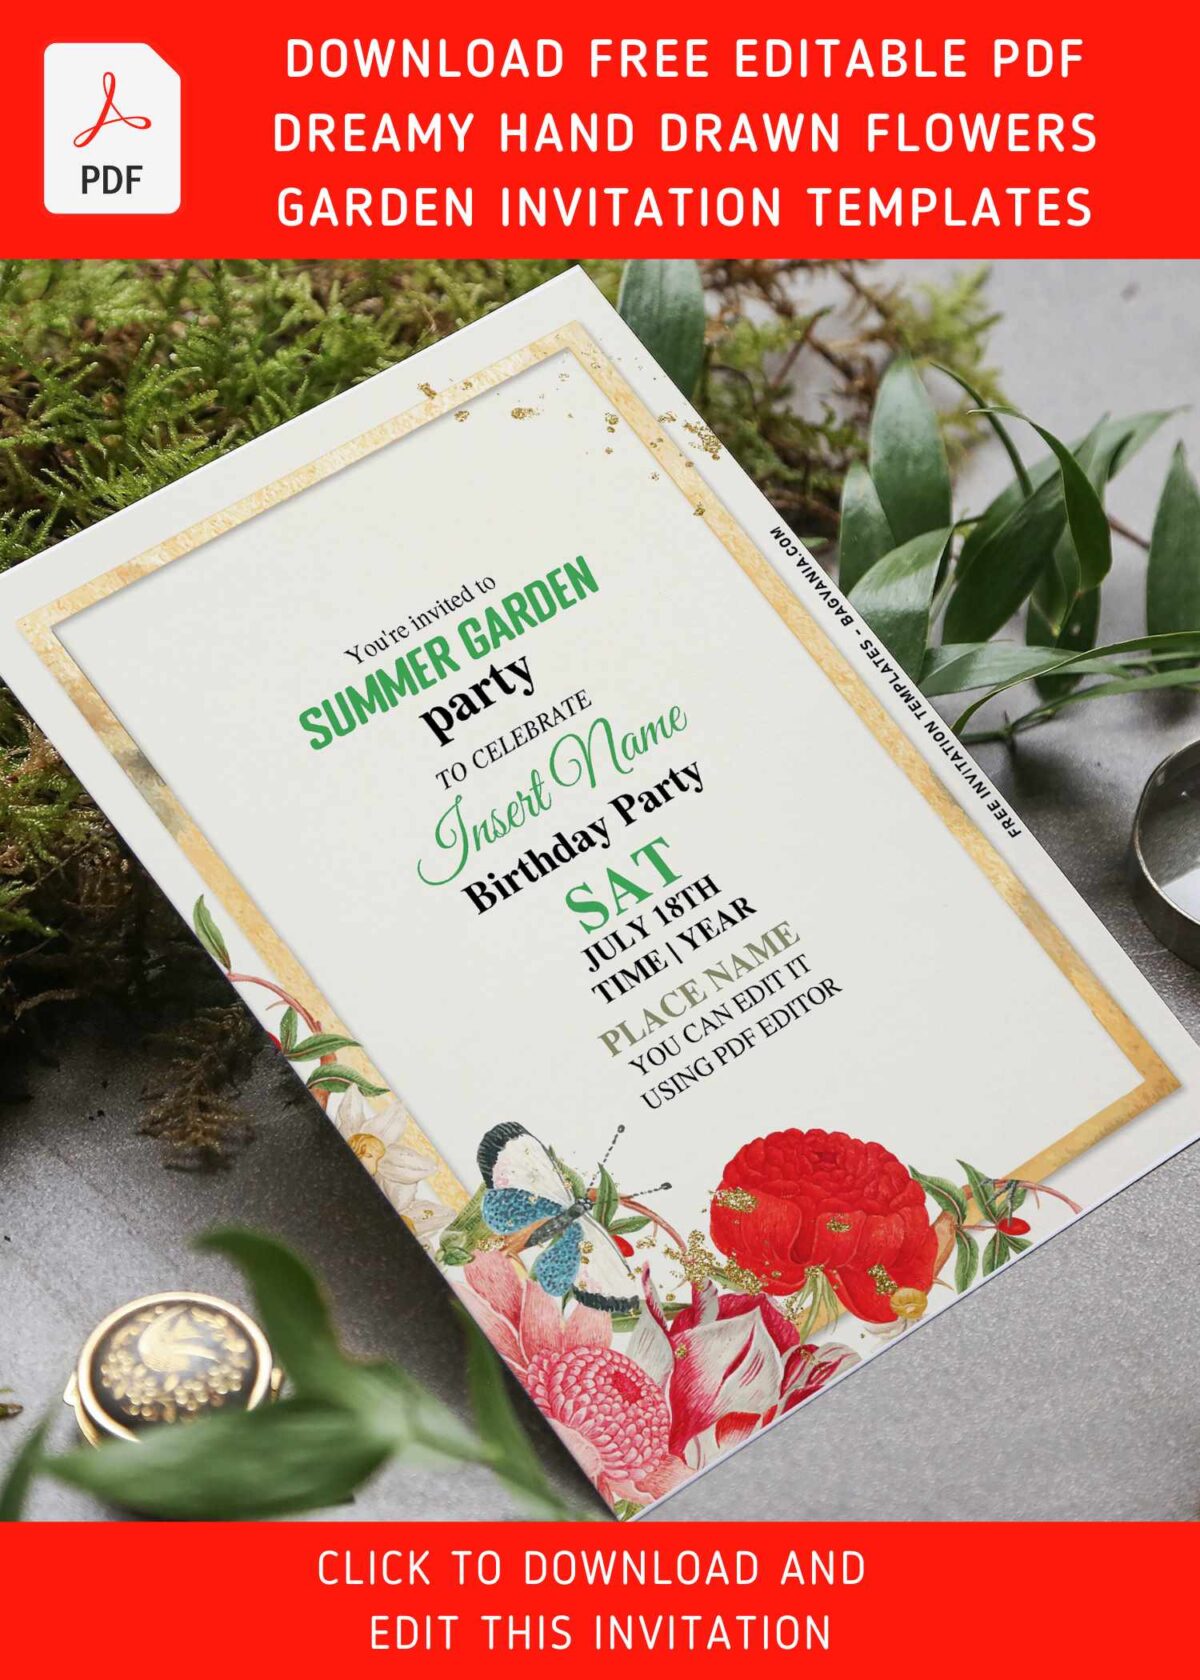 (Free Editable PDF) Dreamy Hand Drawn Flowers Garden Party Invitation Templates with rustic watercolor flowers